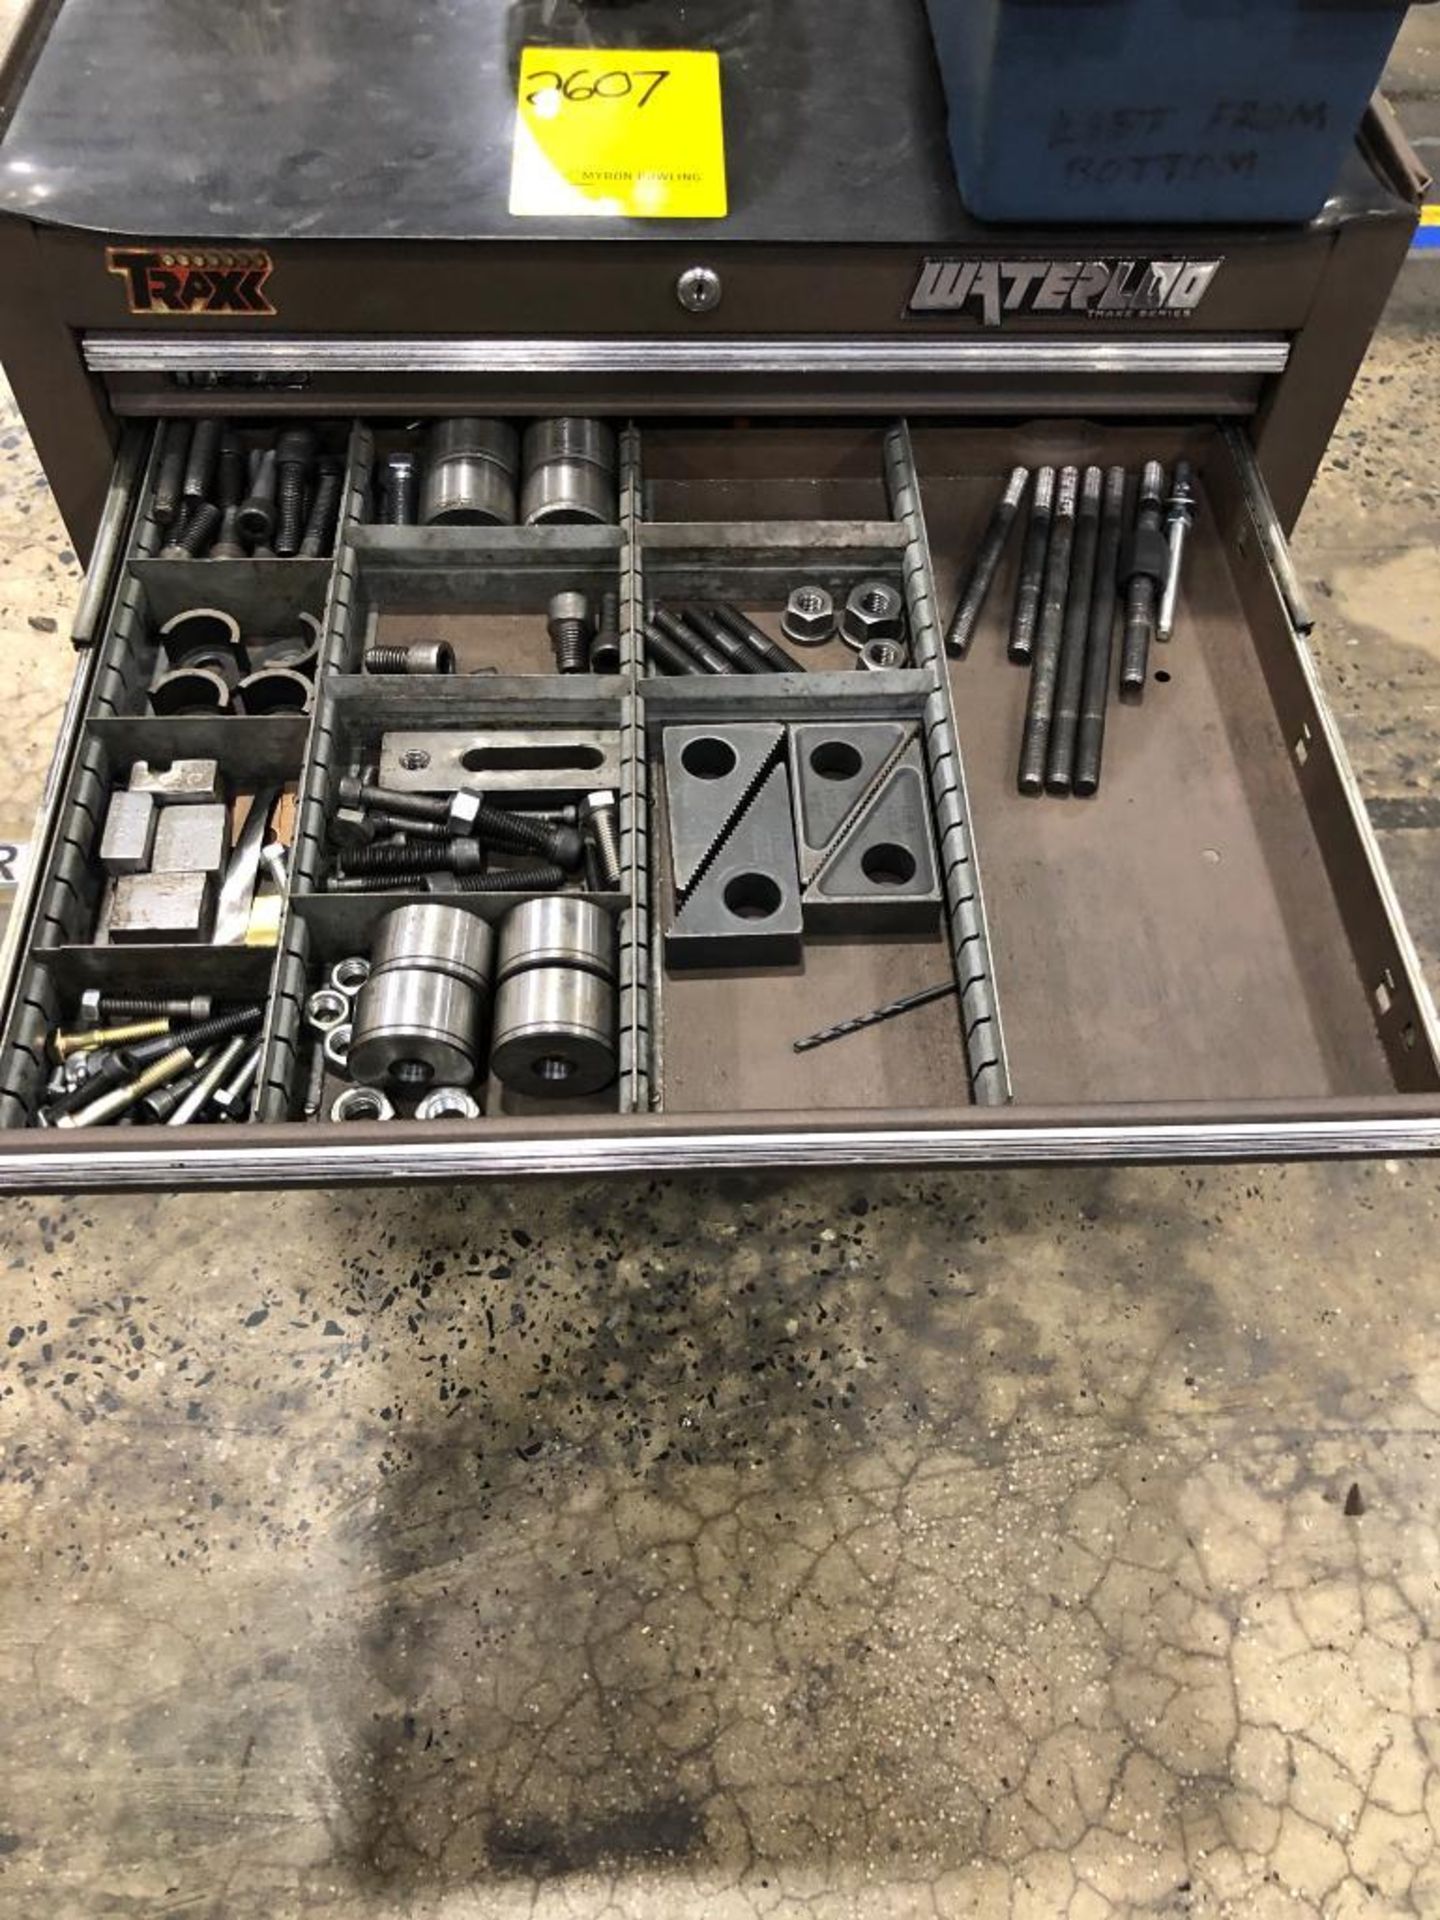 7-DRAWER WATERLOO TOOLBOX, W/ CONTENTS OF CHUCK JAWS, HOLD DOWNS, AND HAND TOOLS - Image 2 of 5